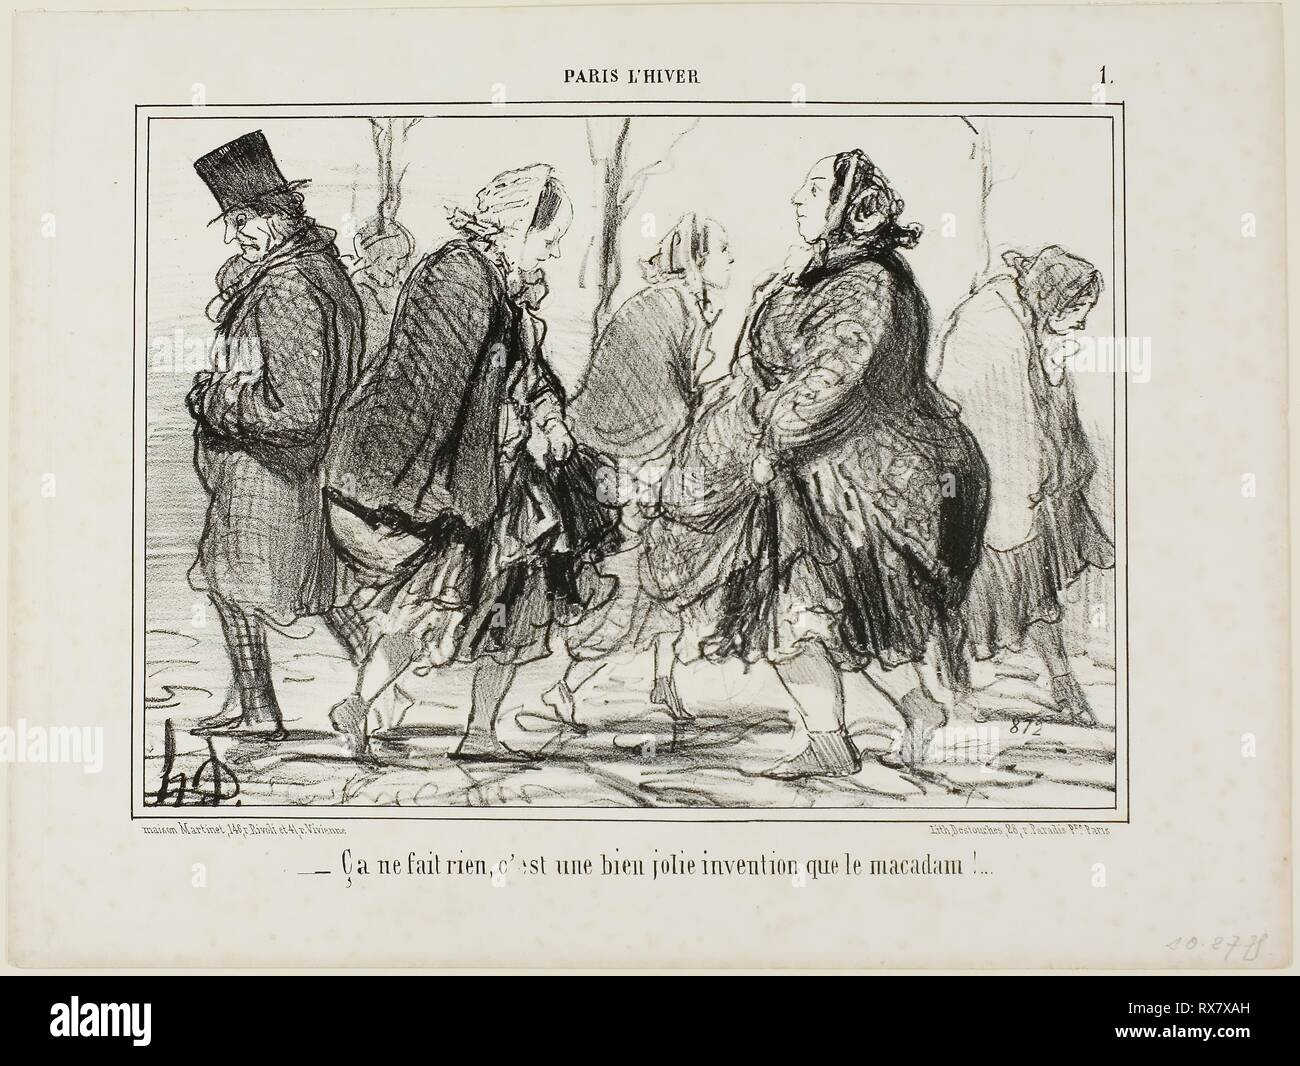 '- That's quite alright... isn't asphalt a marvellous invention?,' plate 1 from Paris L'hiver. Honoré Victorin Daumier; French, 1808-1879. Date: 1856. Dimensions: 186 × 261 mm (image); 259 × 343 mm (sheet). Lithograph in black on white wove paper. Origin: France. Museum: The Chicago Art Institute. Author: Honoré-Victorin Daumier. Stock Photo